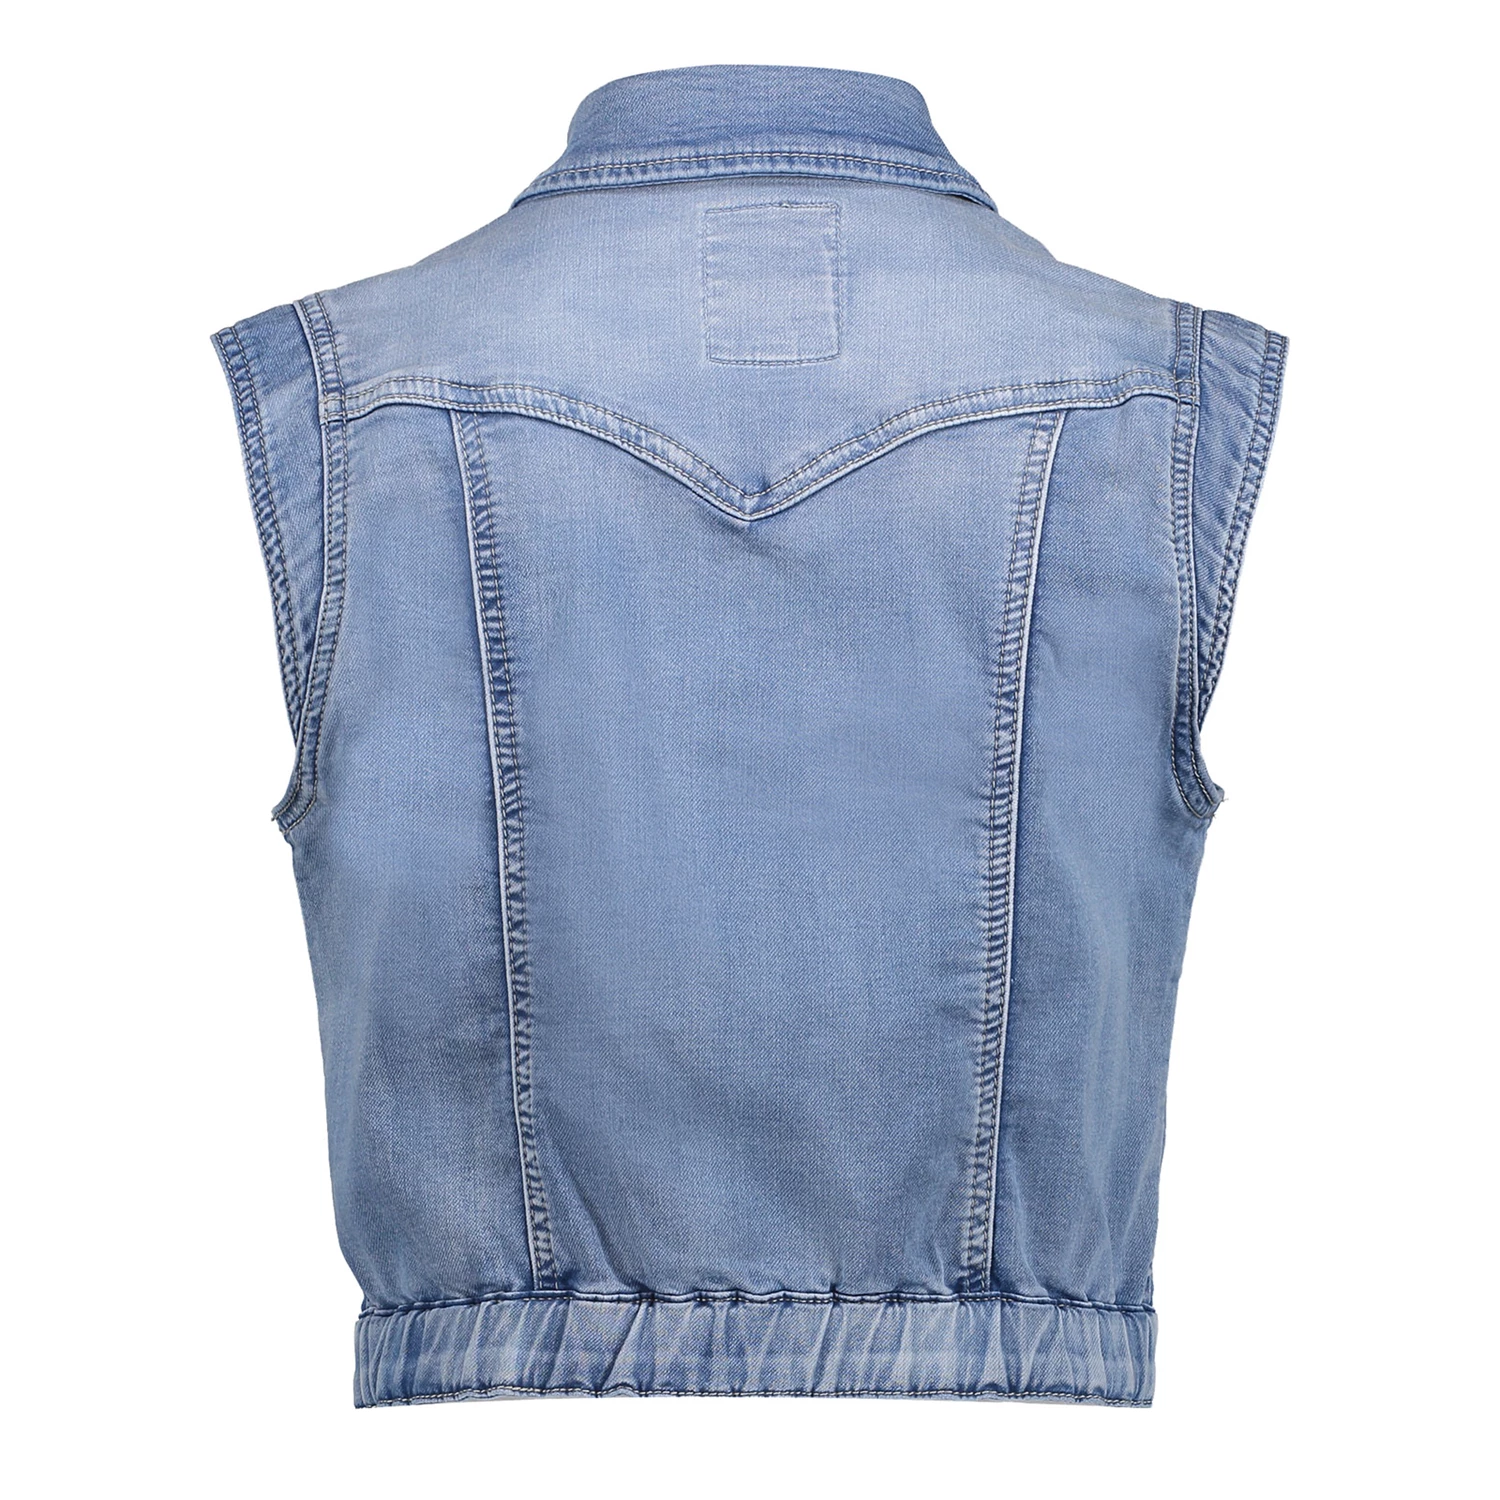 MISS MOLY Women's Denim Vest Distressed Cropped Washed Classic Jean Jackets  W Ch | eBay